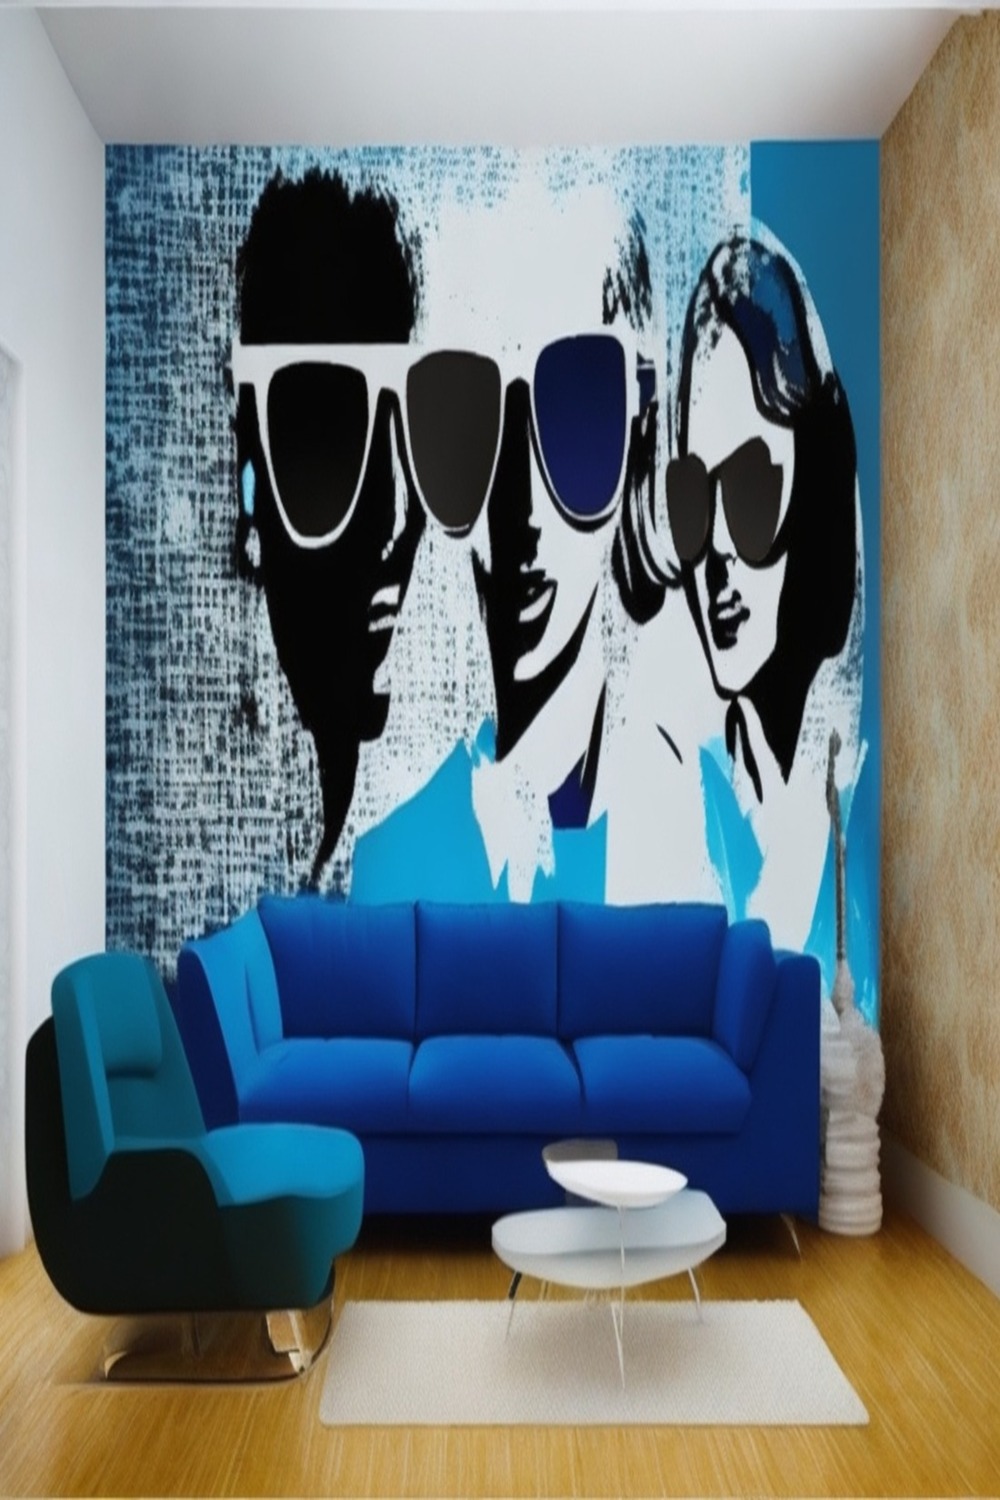 Interior wall art background design pinterest preview image.